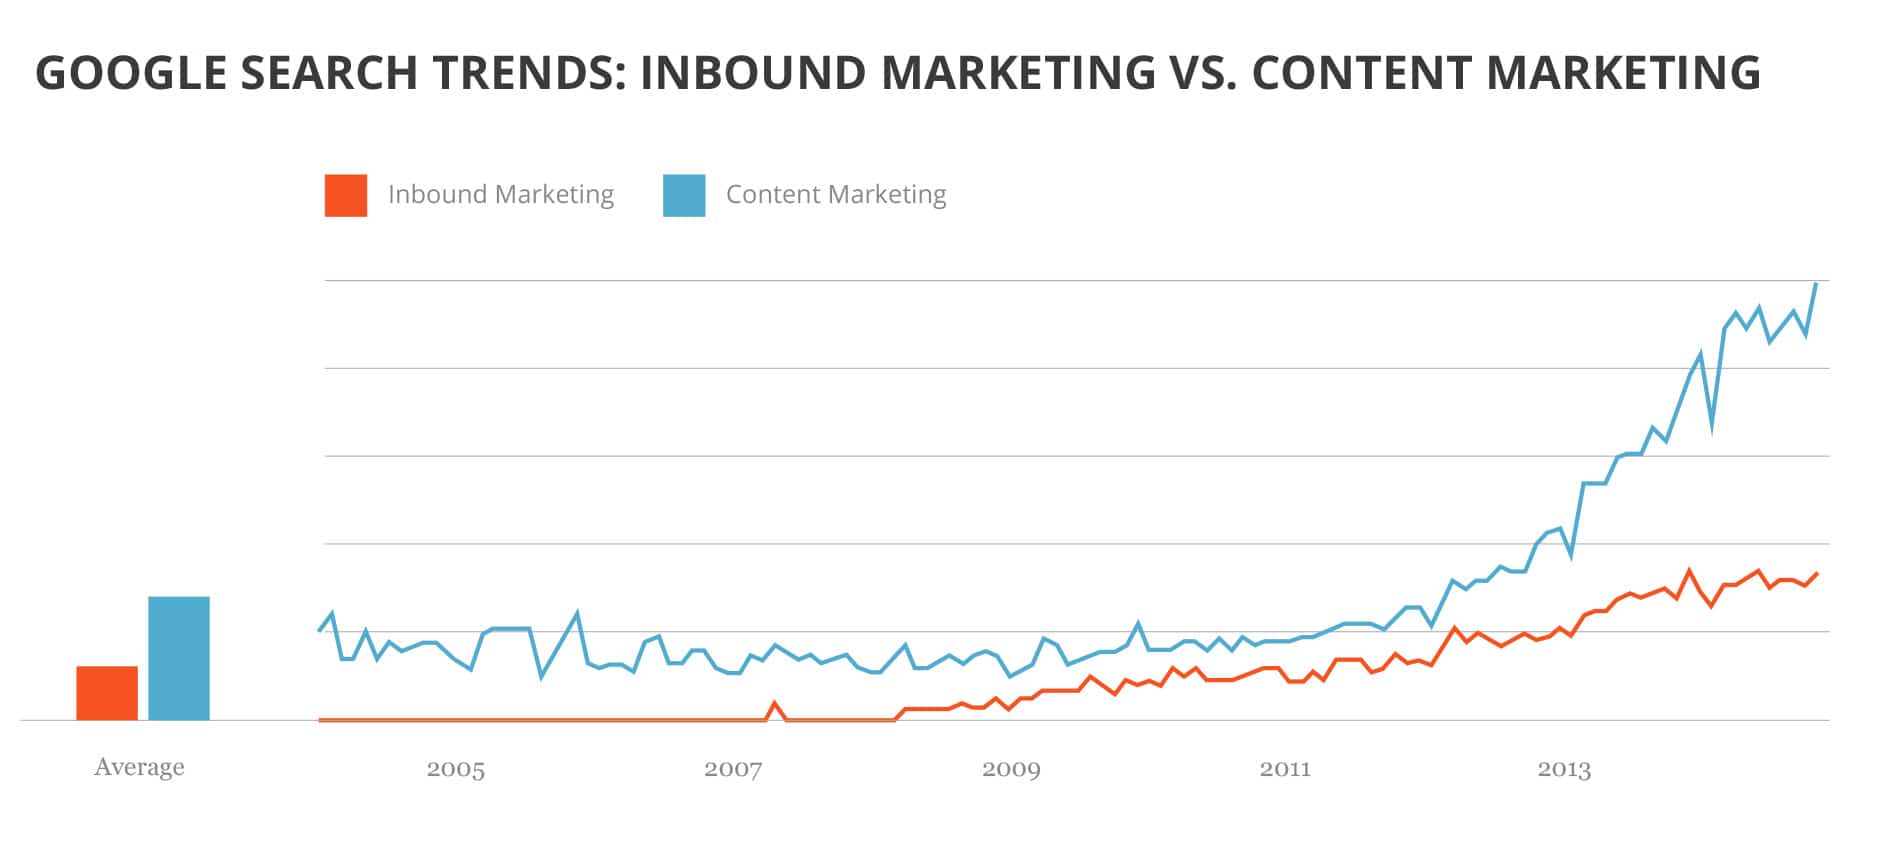 Google Search Trends for Inbound Marketing vs Content Marketing